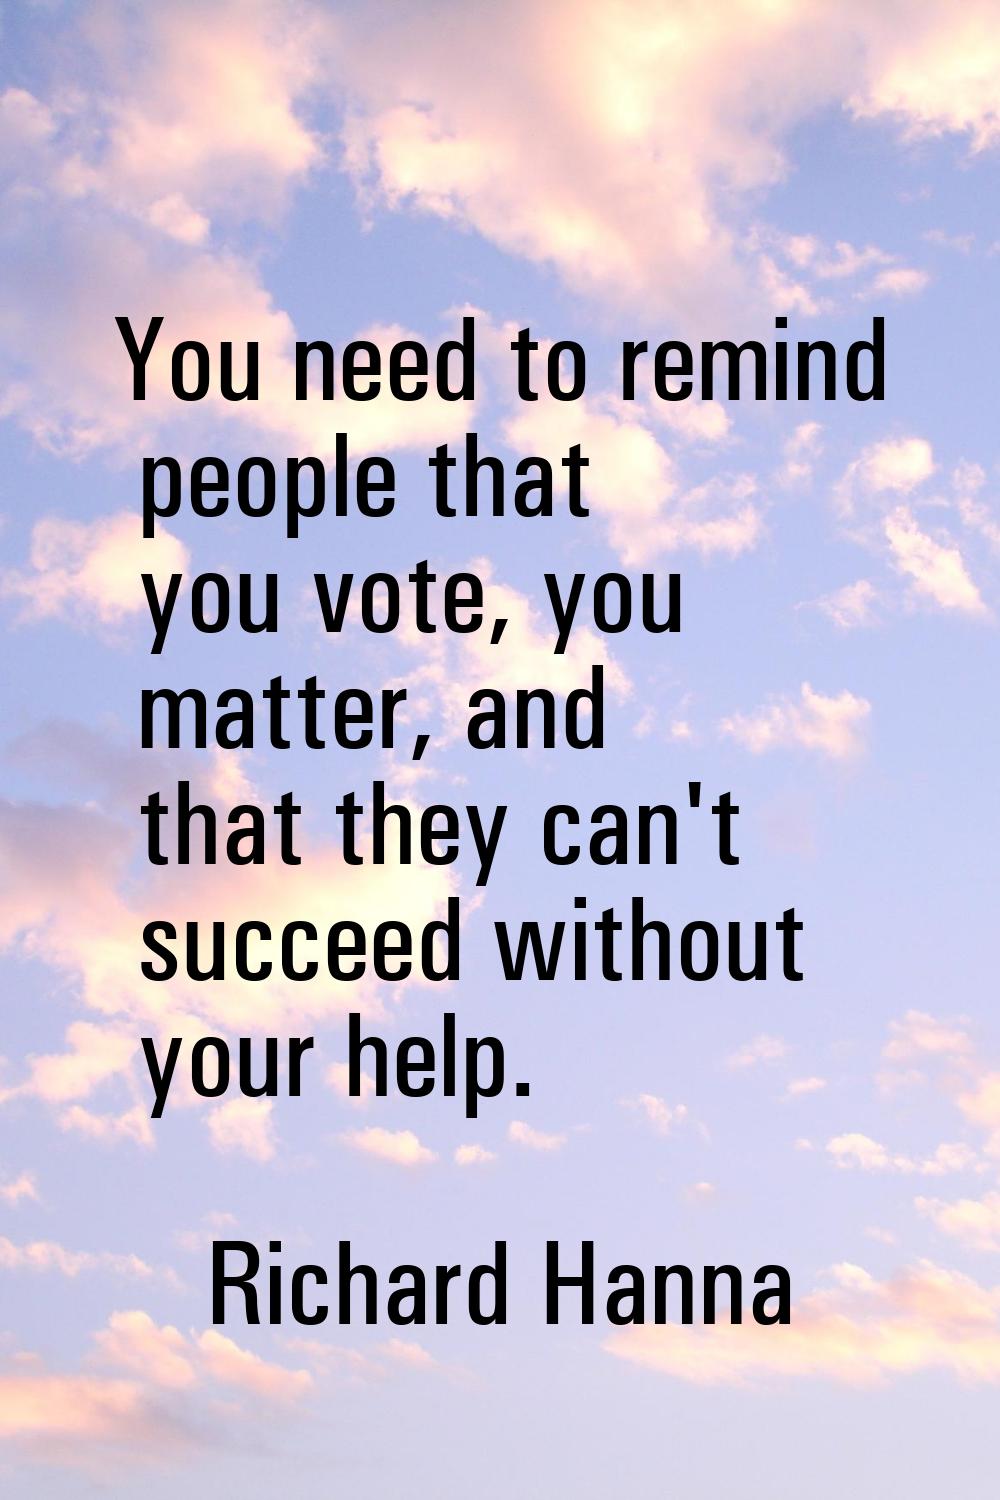 You need to remind people that you vote, you matter, and that they can't succeed without your help.